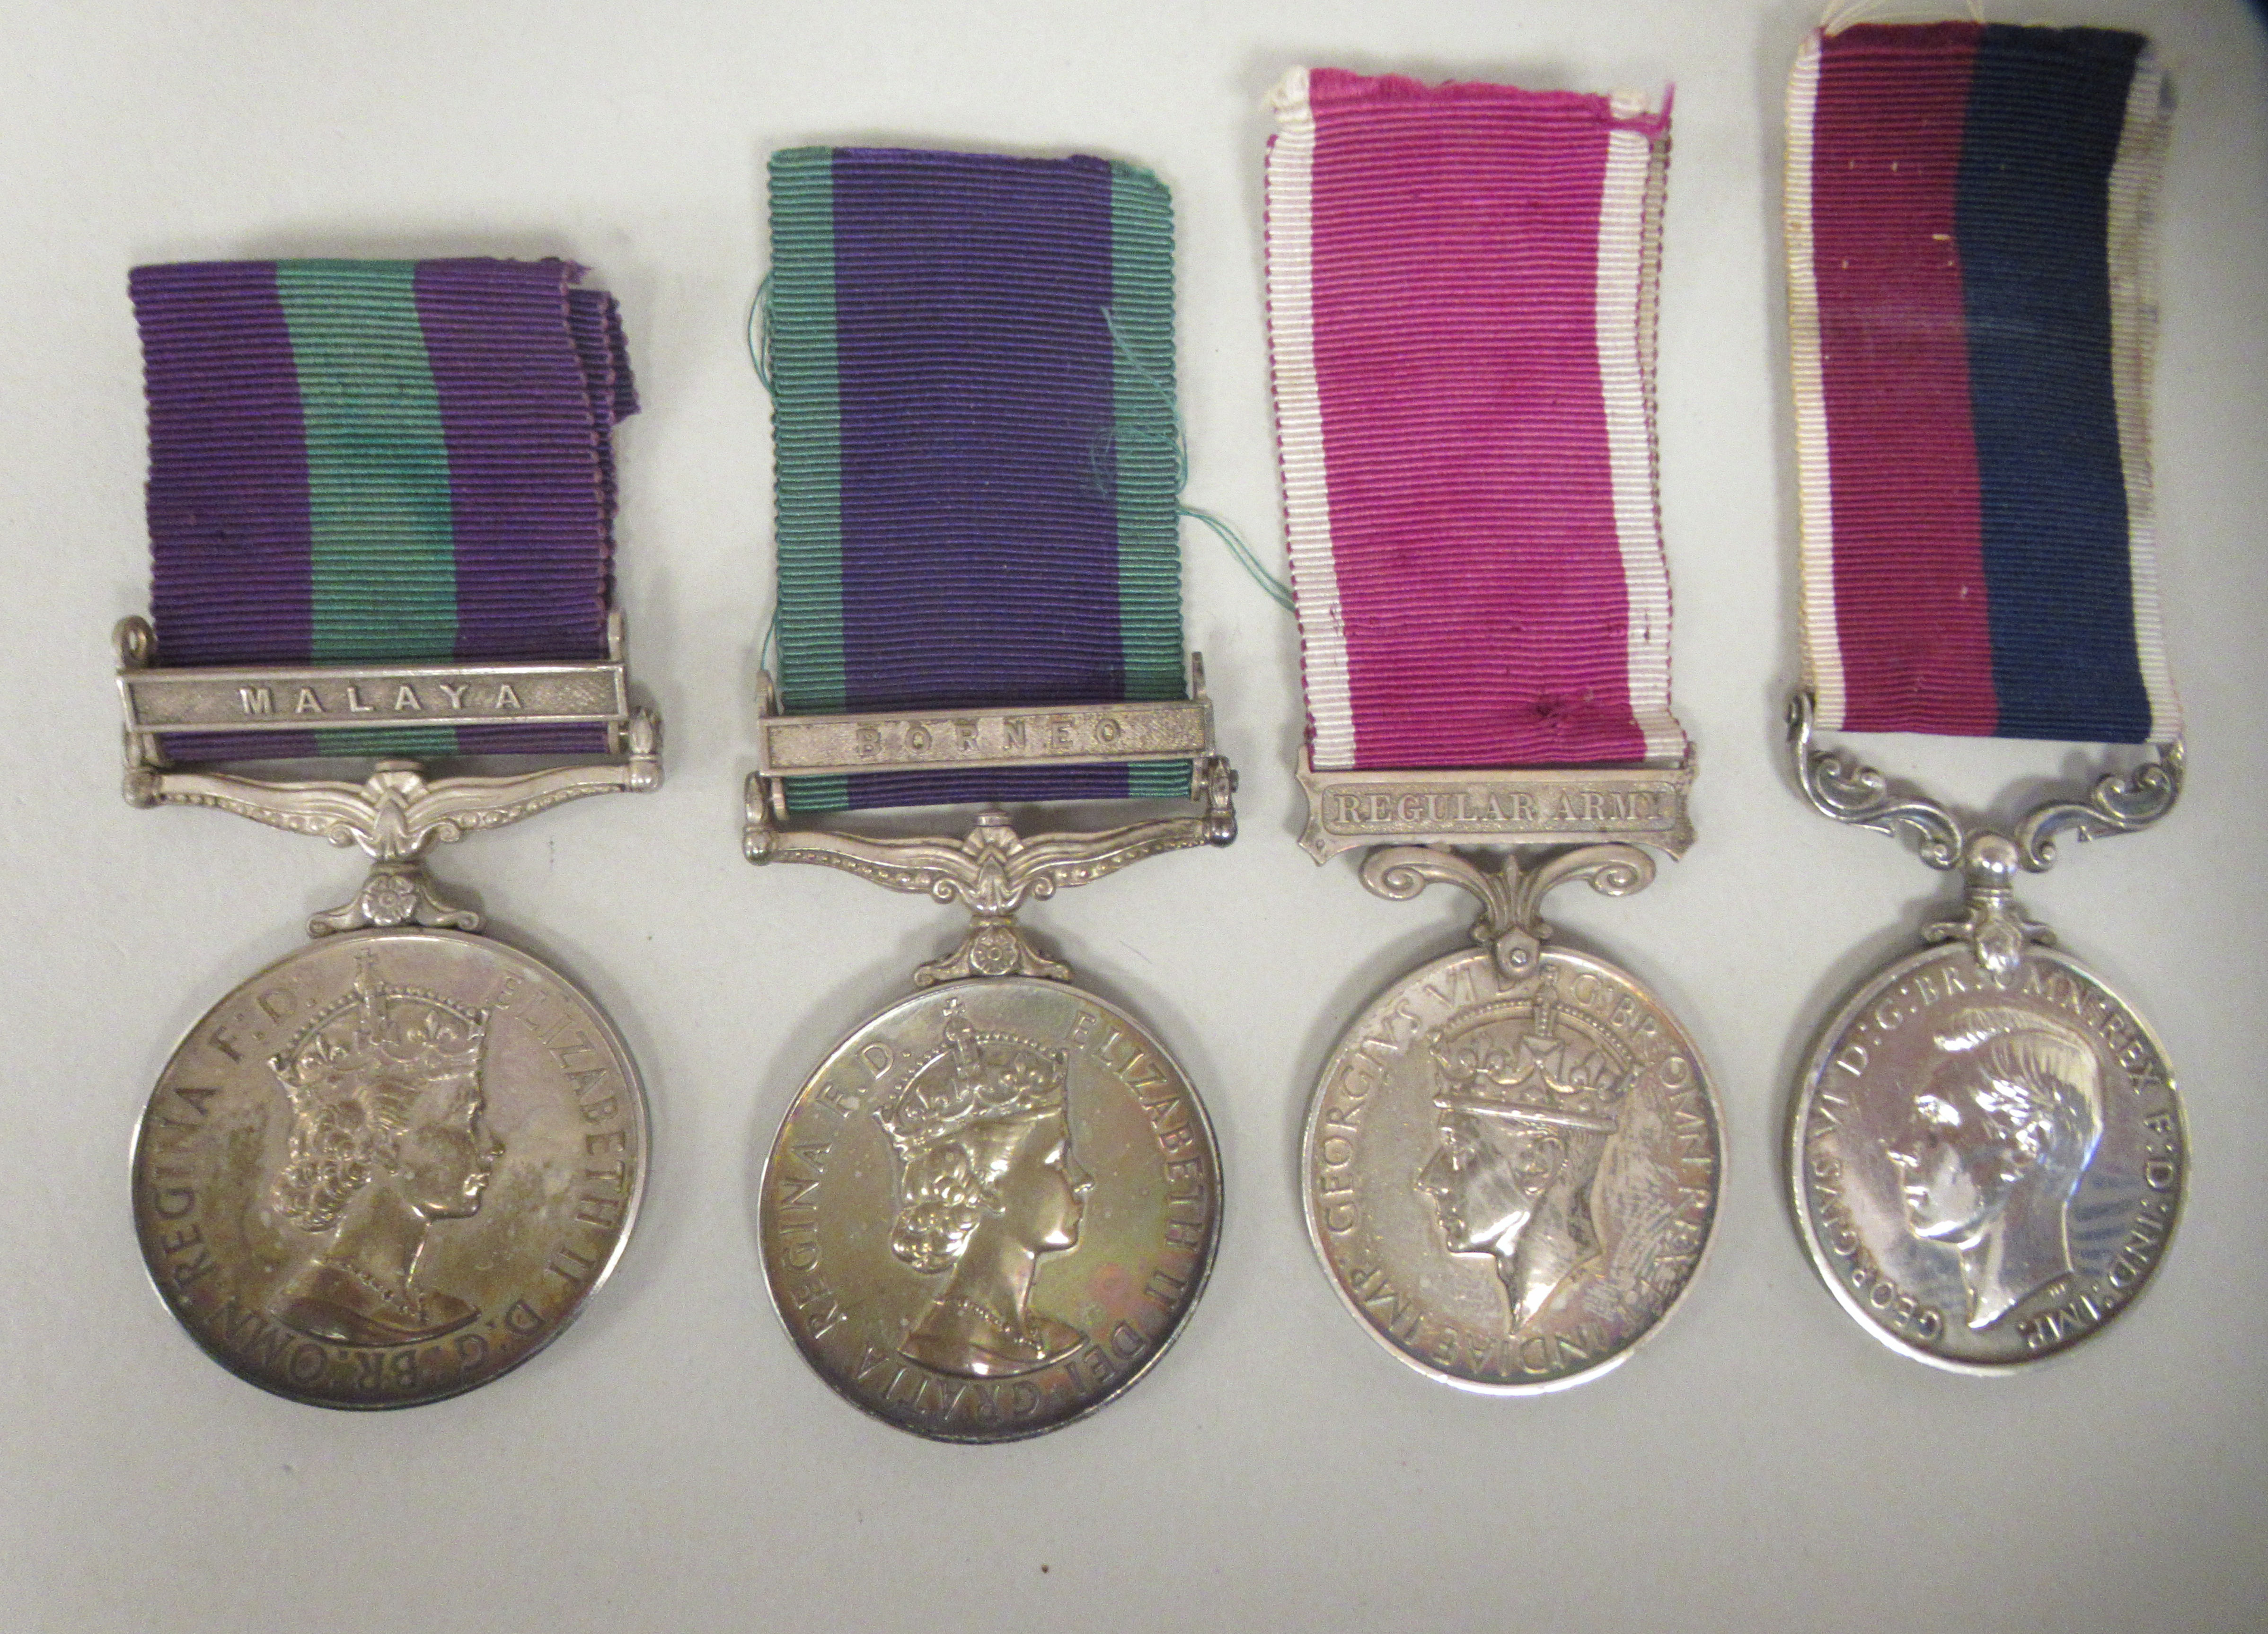 A King George VI Regular Army medal for Long Service and Good Conduct and ribbon; inscribed